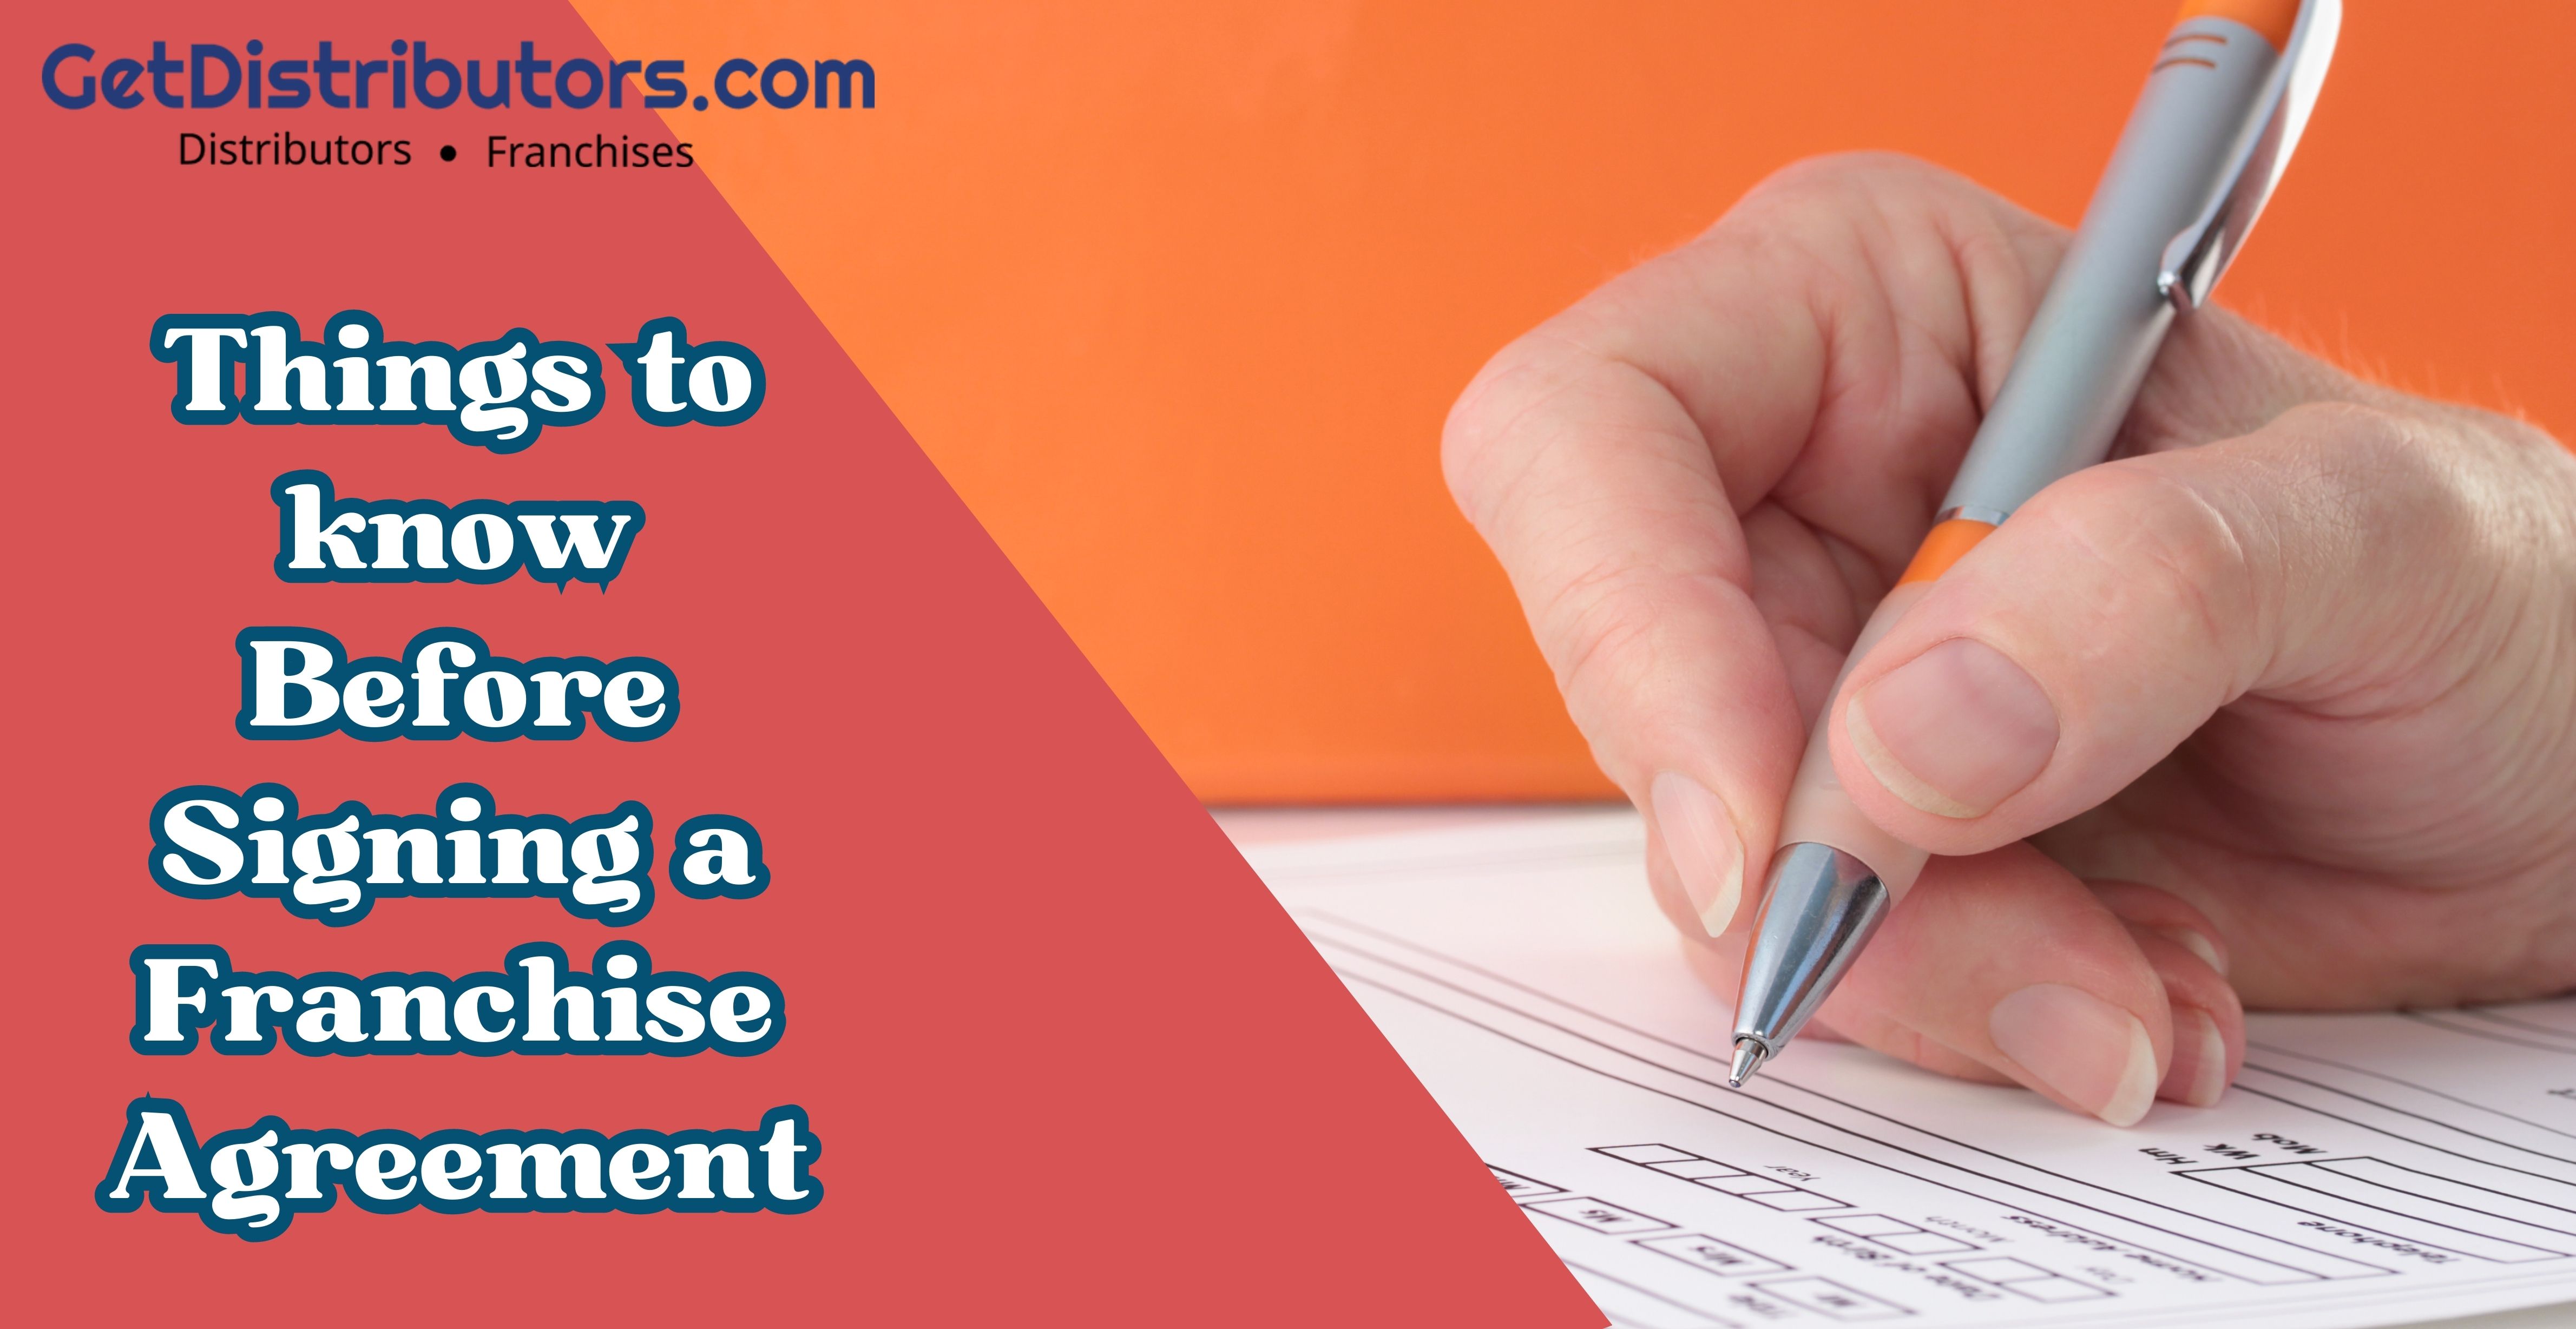 Things to know Before Signing a Franchise Agreement